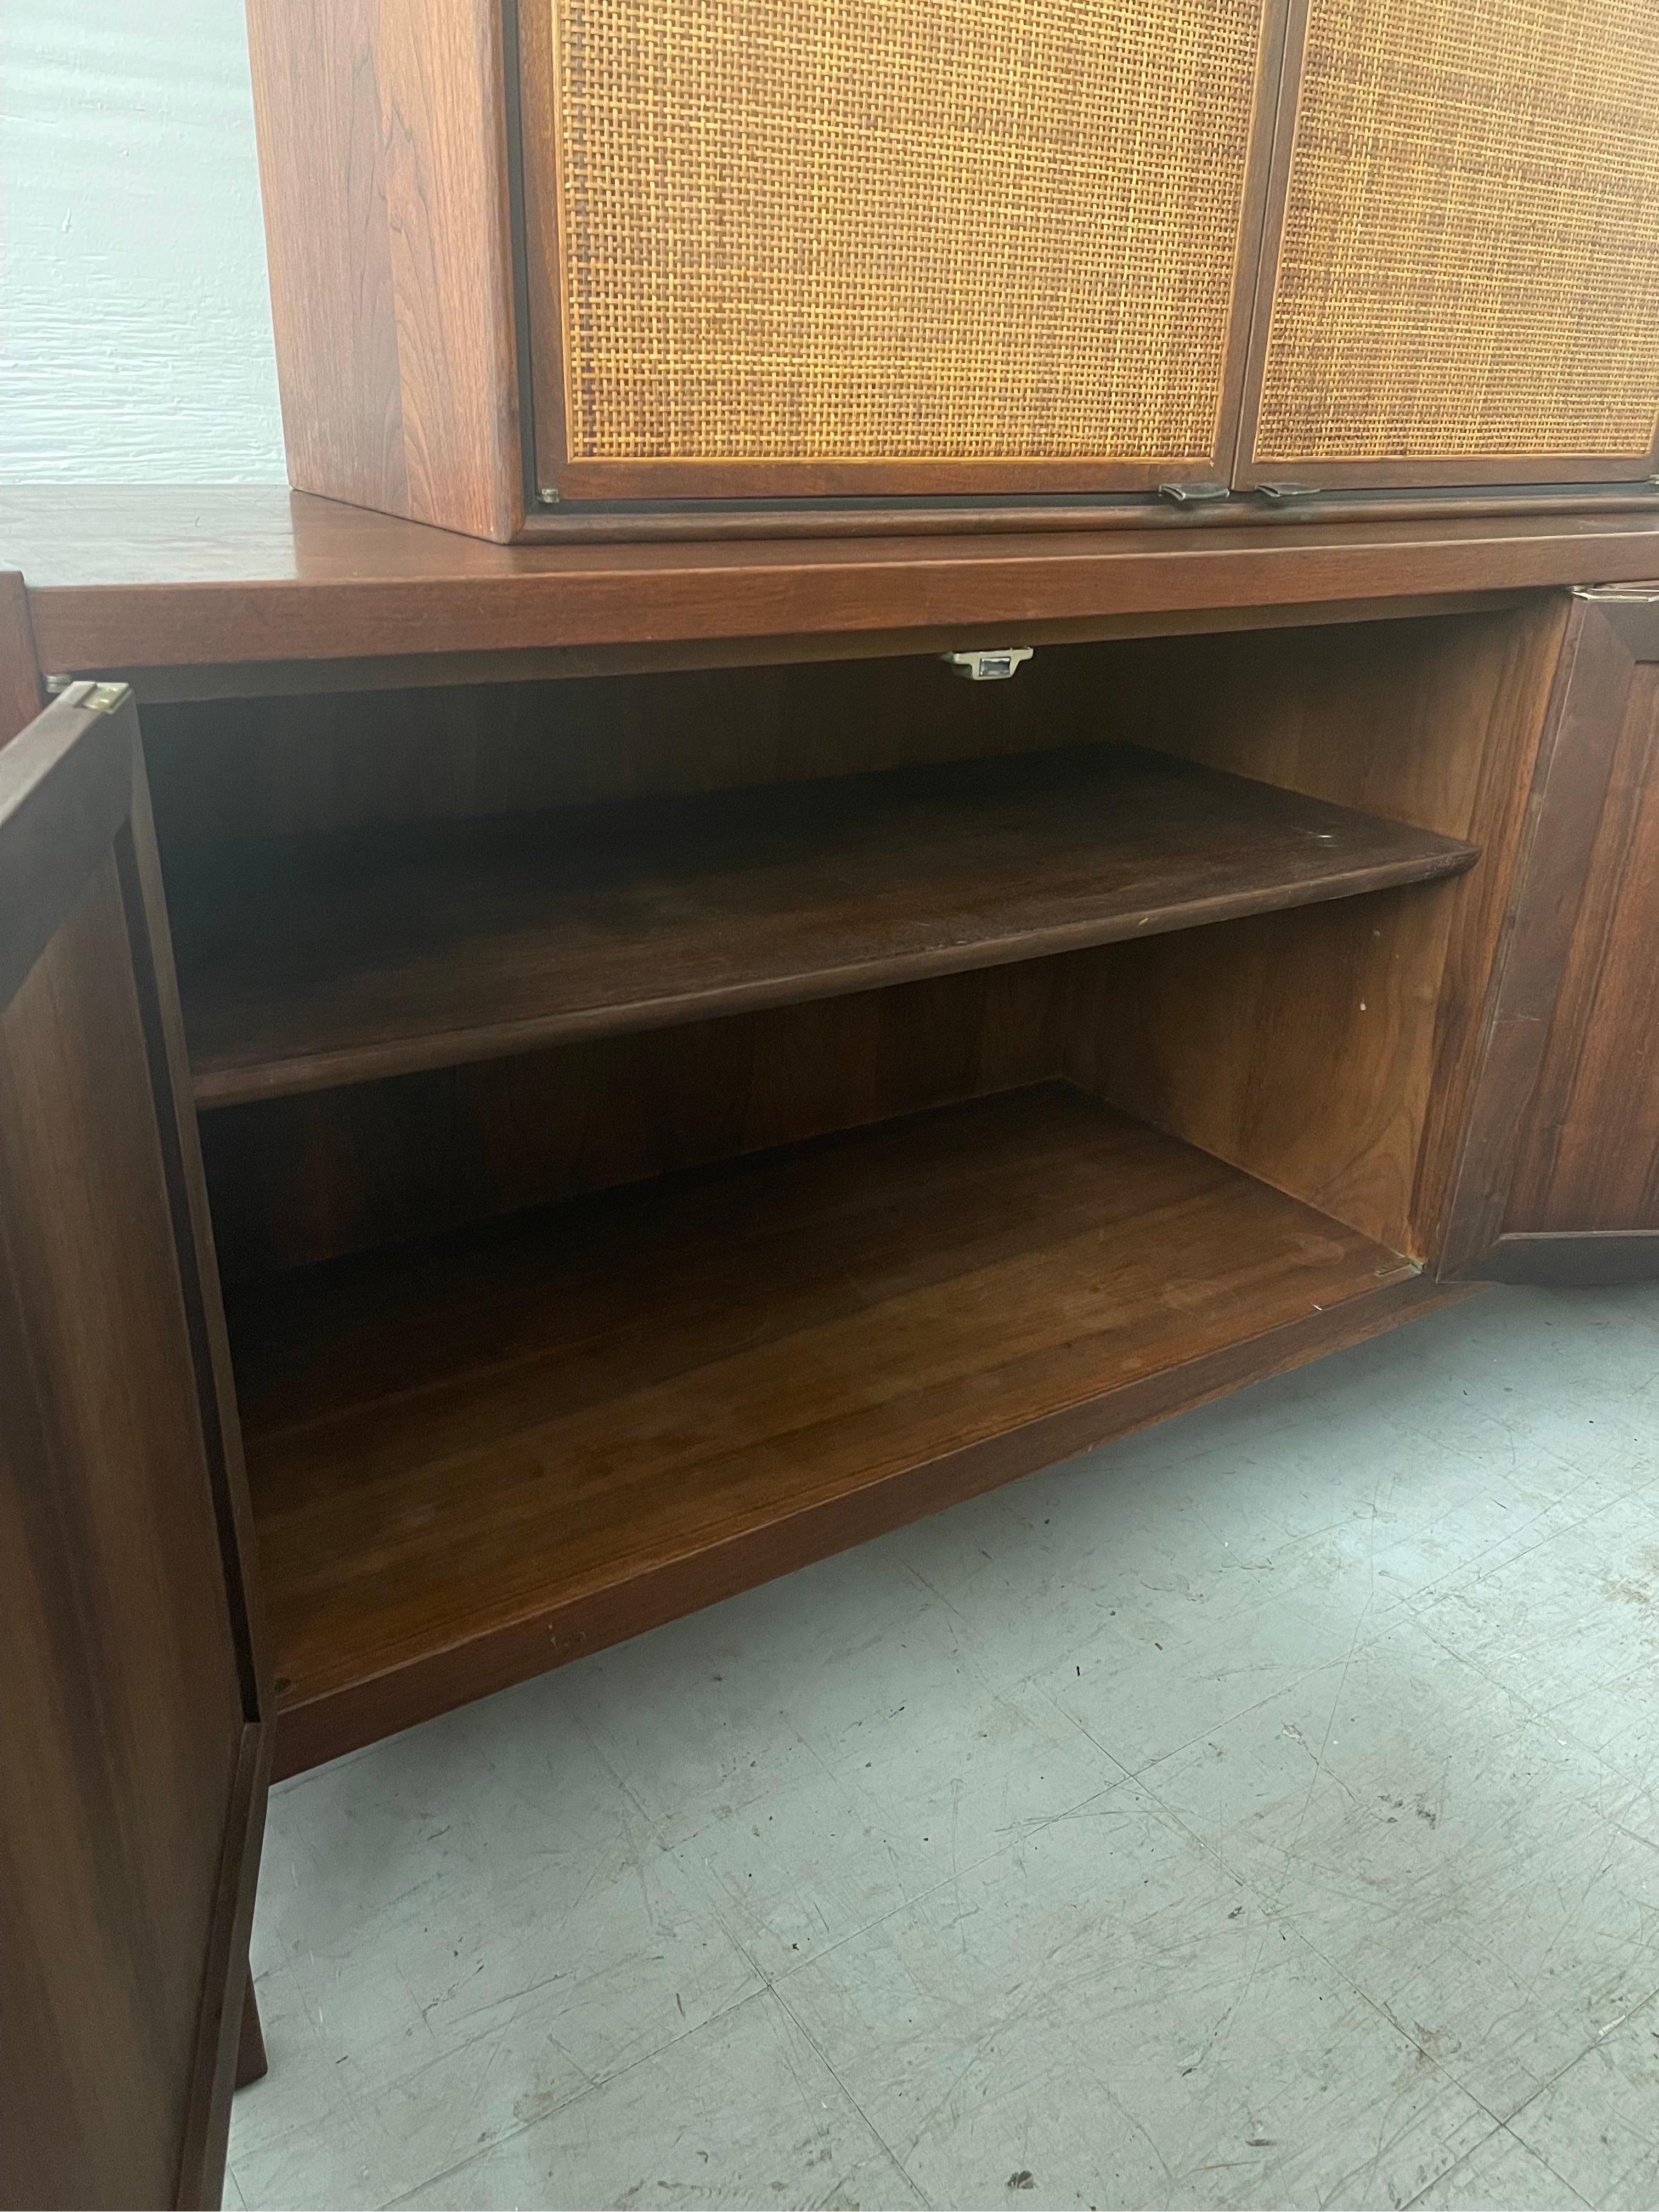 Vintage 2-piece mid century credenza with caned accents. The top portion serves as a storage cabinet with height adjustable shelves. The credenza includes spacious drawers and height adjustable shelving on the left side.

The top is removable, if